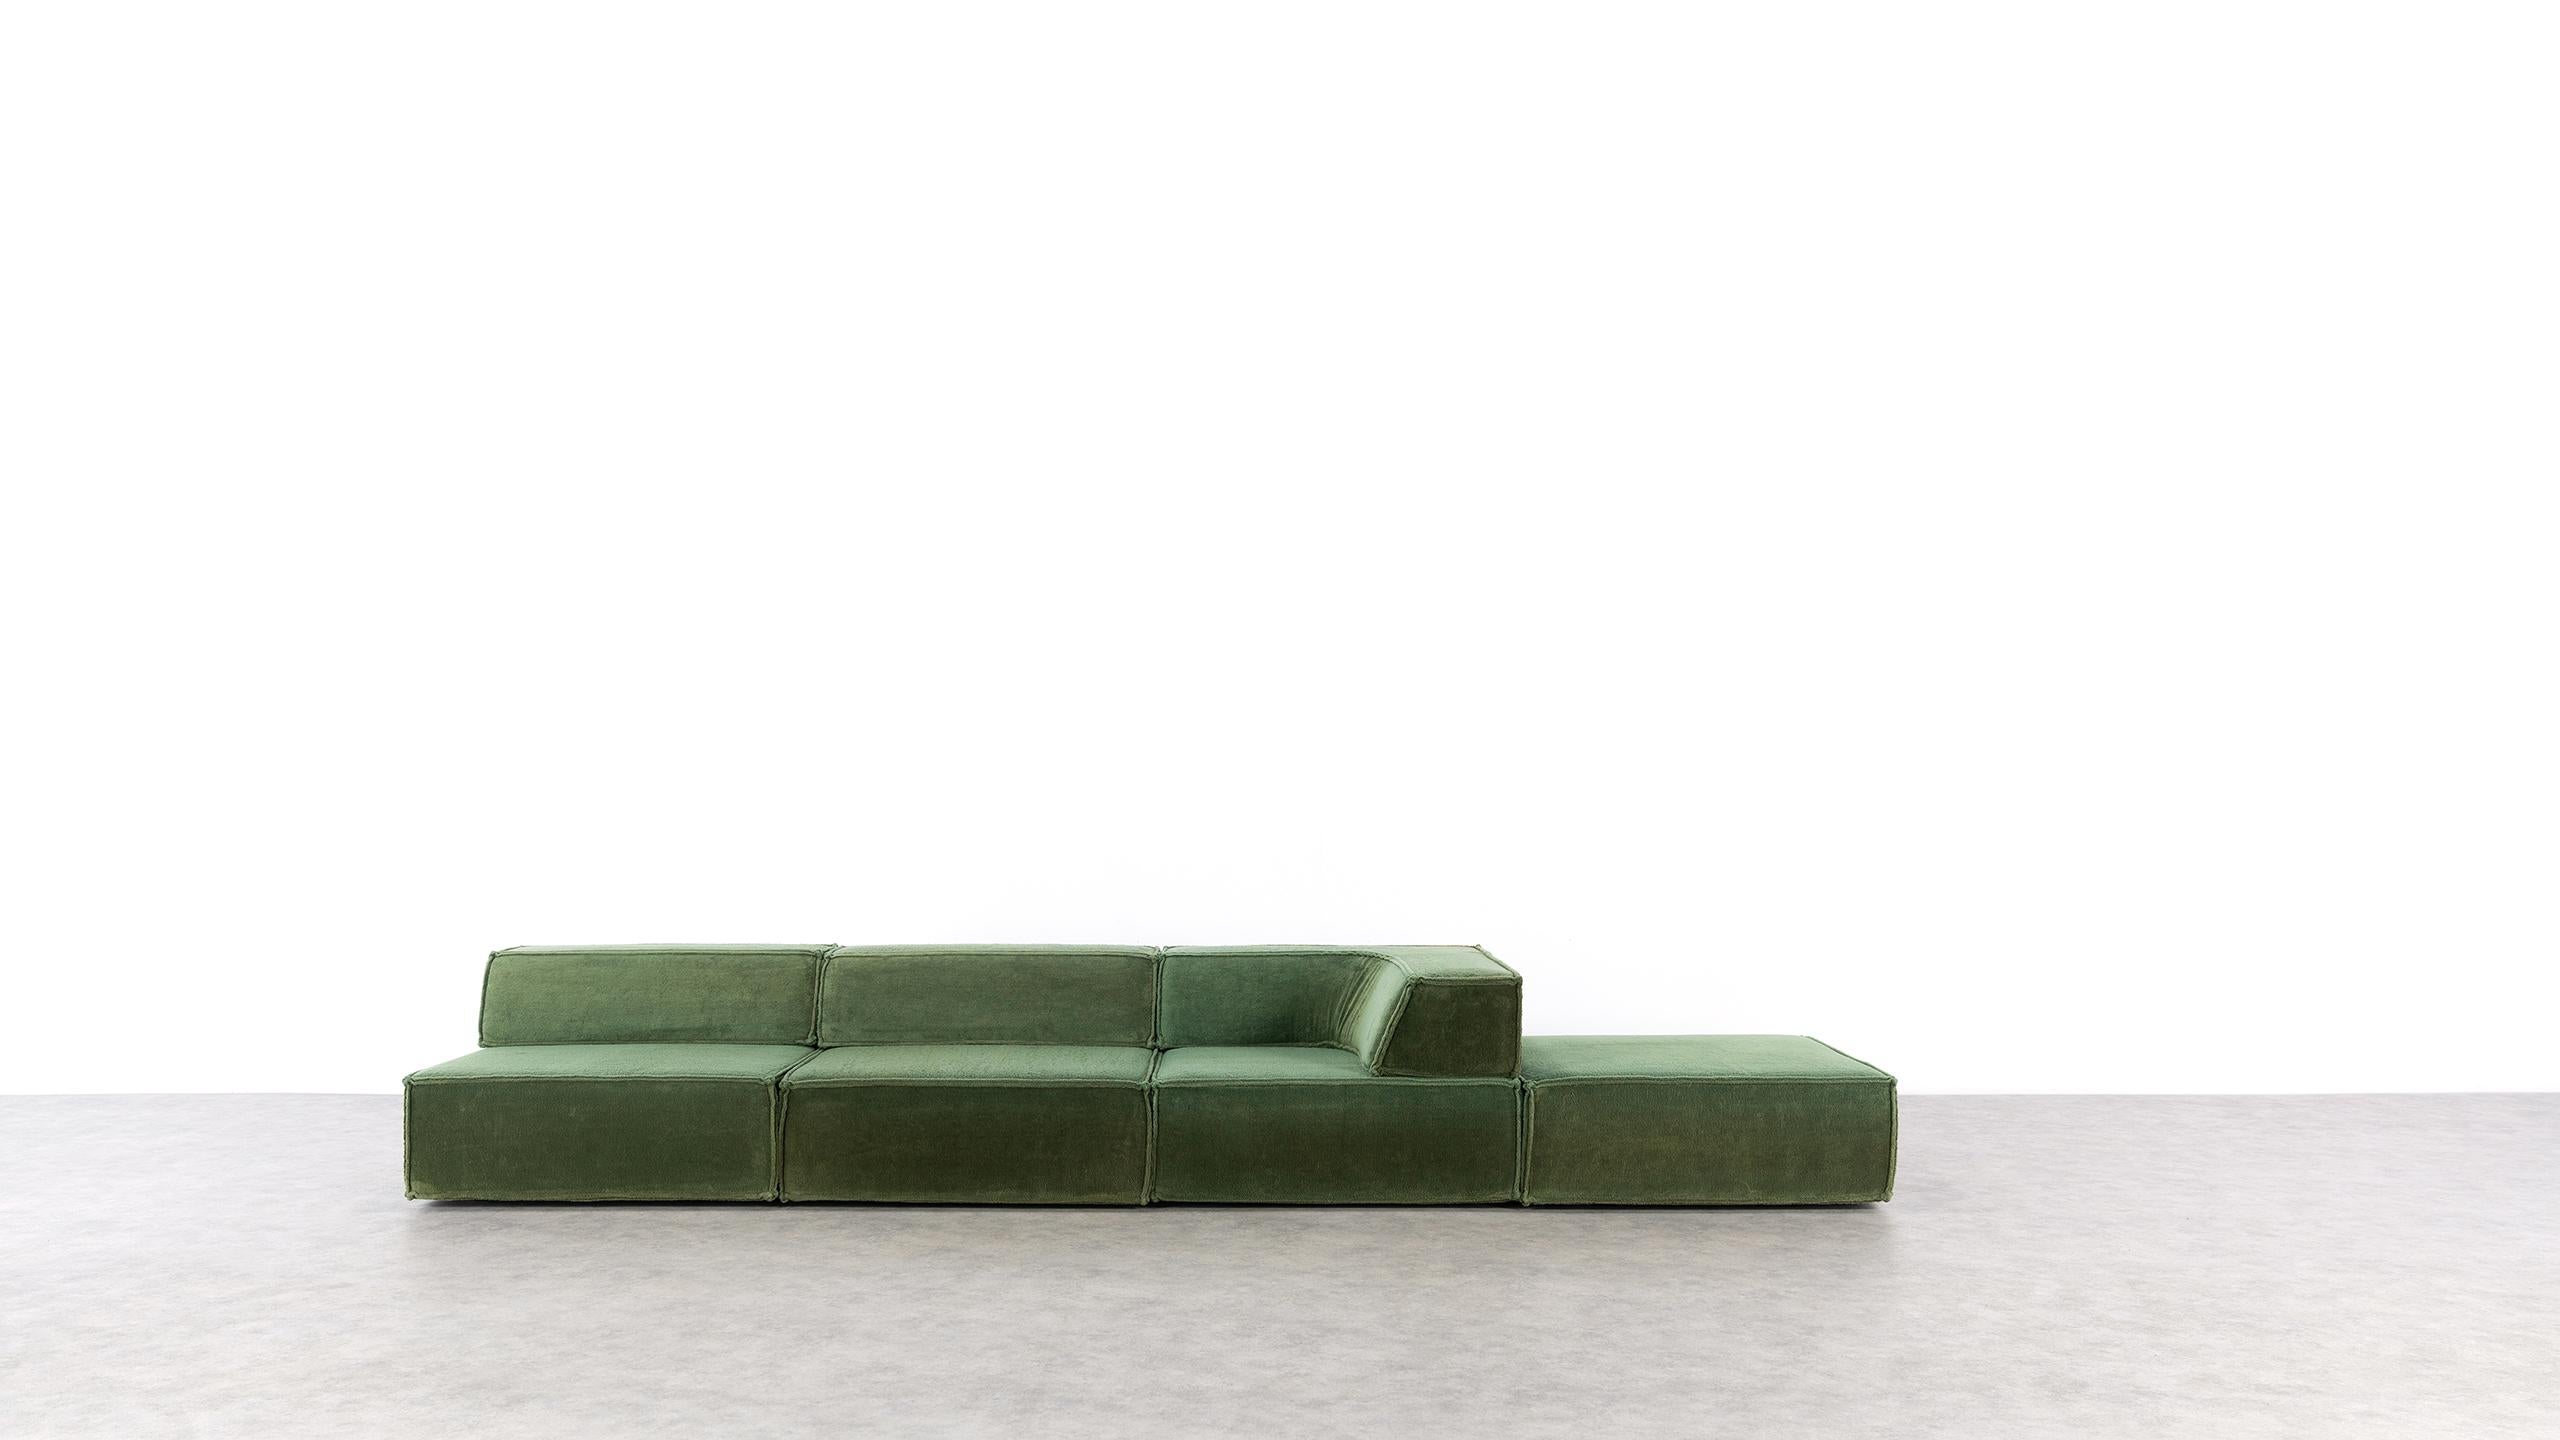 COR Trio Modular Sofa, Giant Landscape in Green, 1972 by Team Form AG, Swiss 2